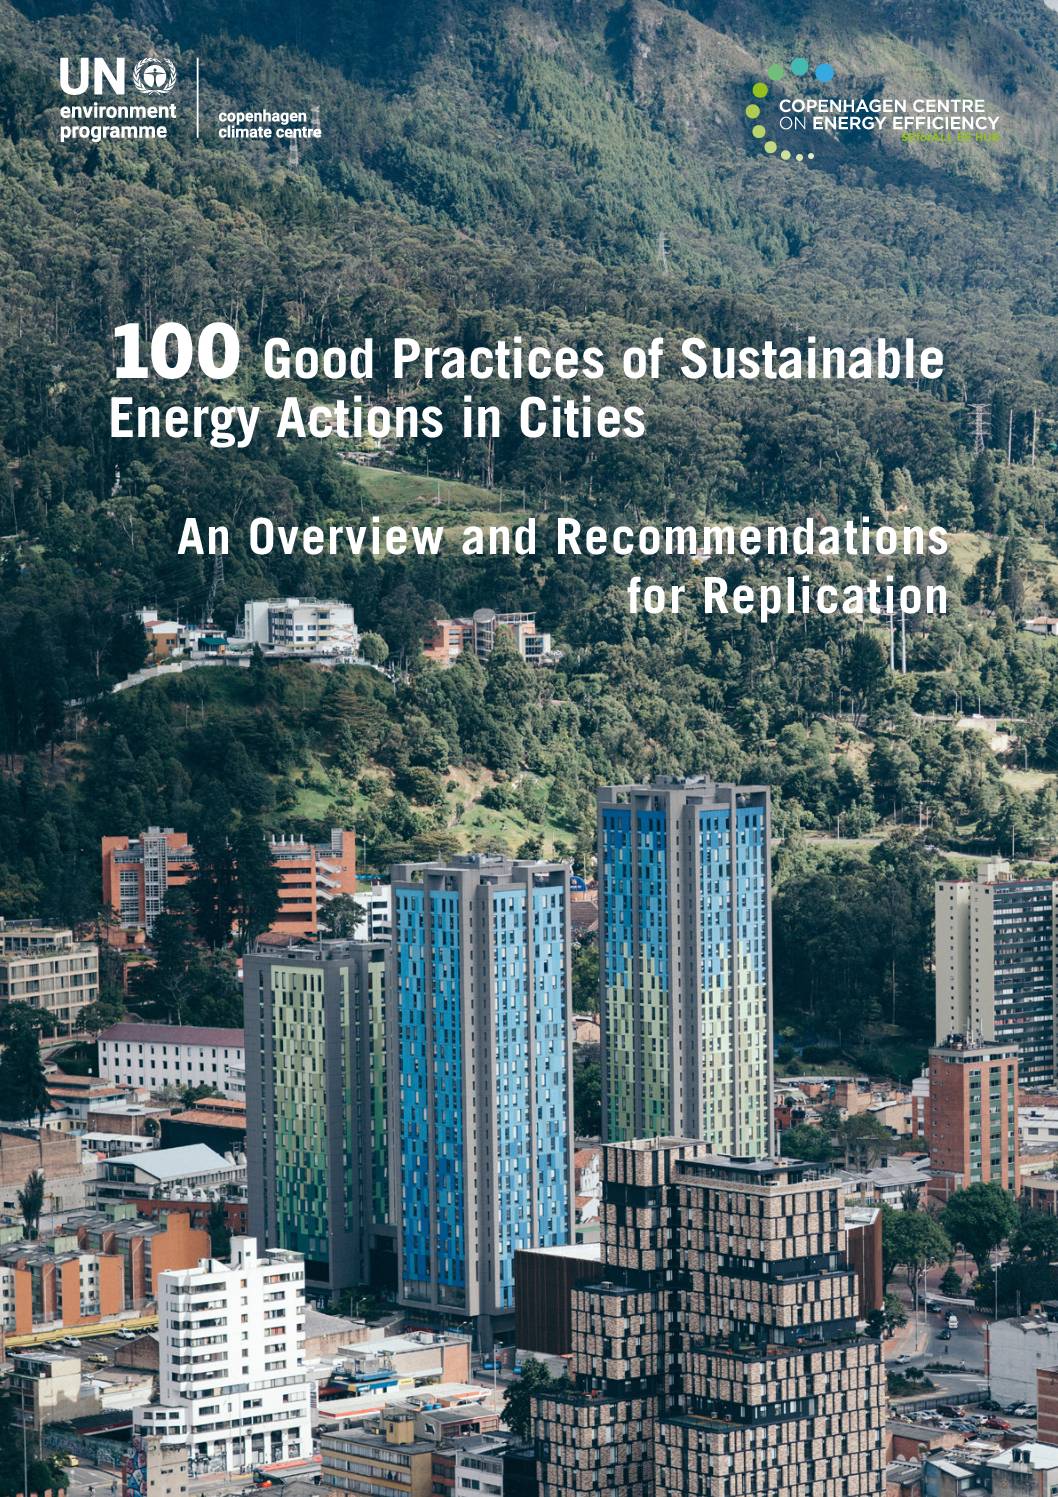 100 Good Practices of Sustainable Energy Actions in Cities. An Overview and Recommendations for Replication